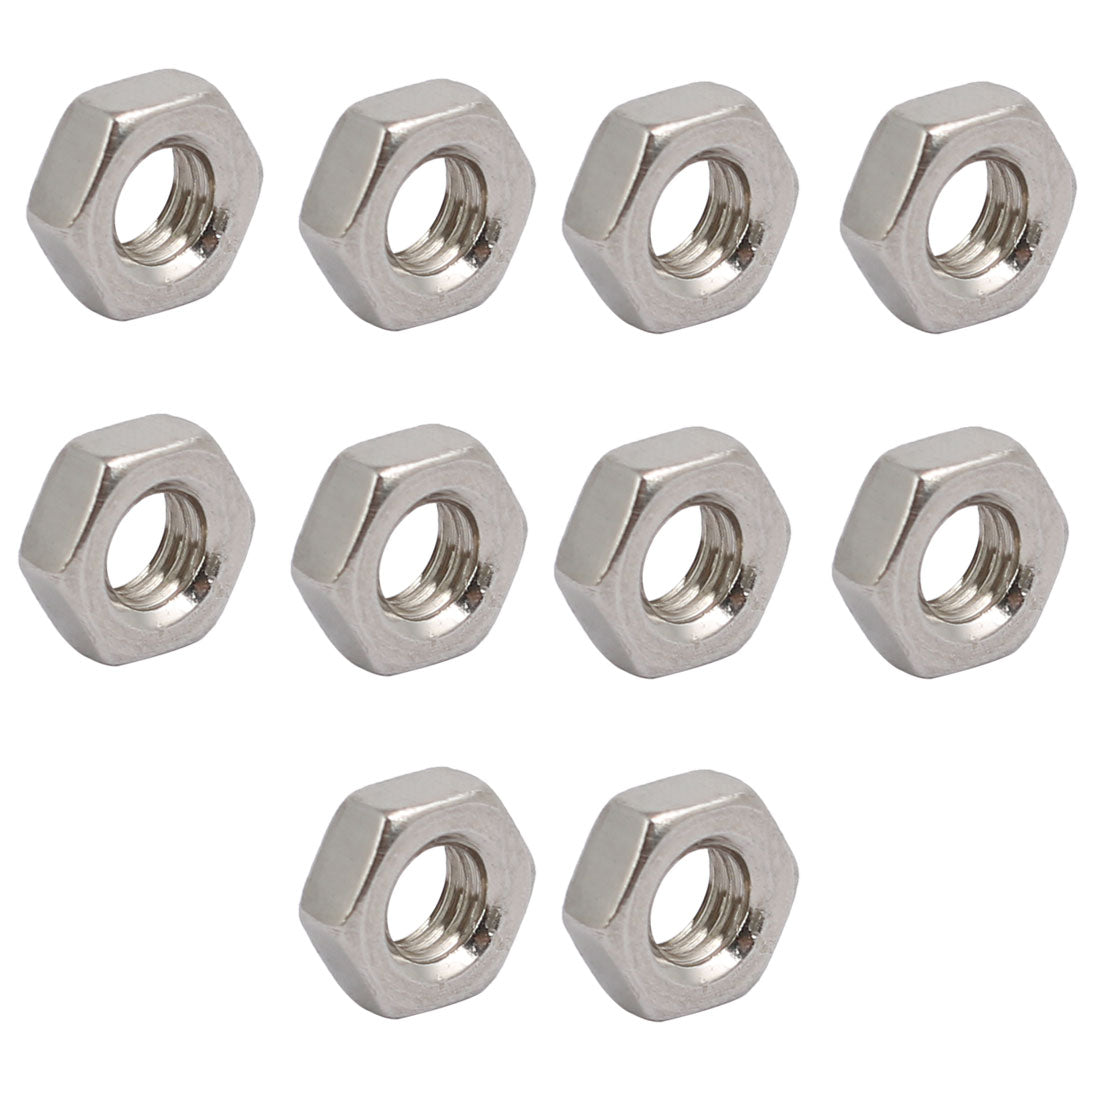 uxcell Uxcell 10pcs M4 x 0.7mm Pitch Metric Thread 304 Stainless Steel Left Hand Hex Nuts